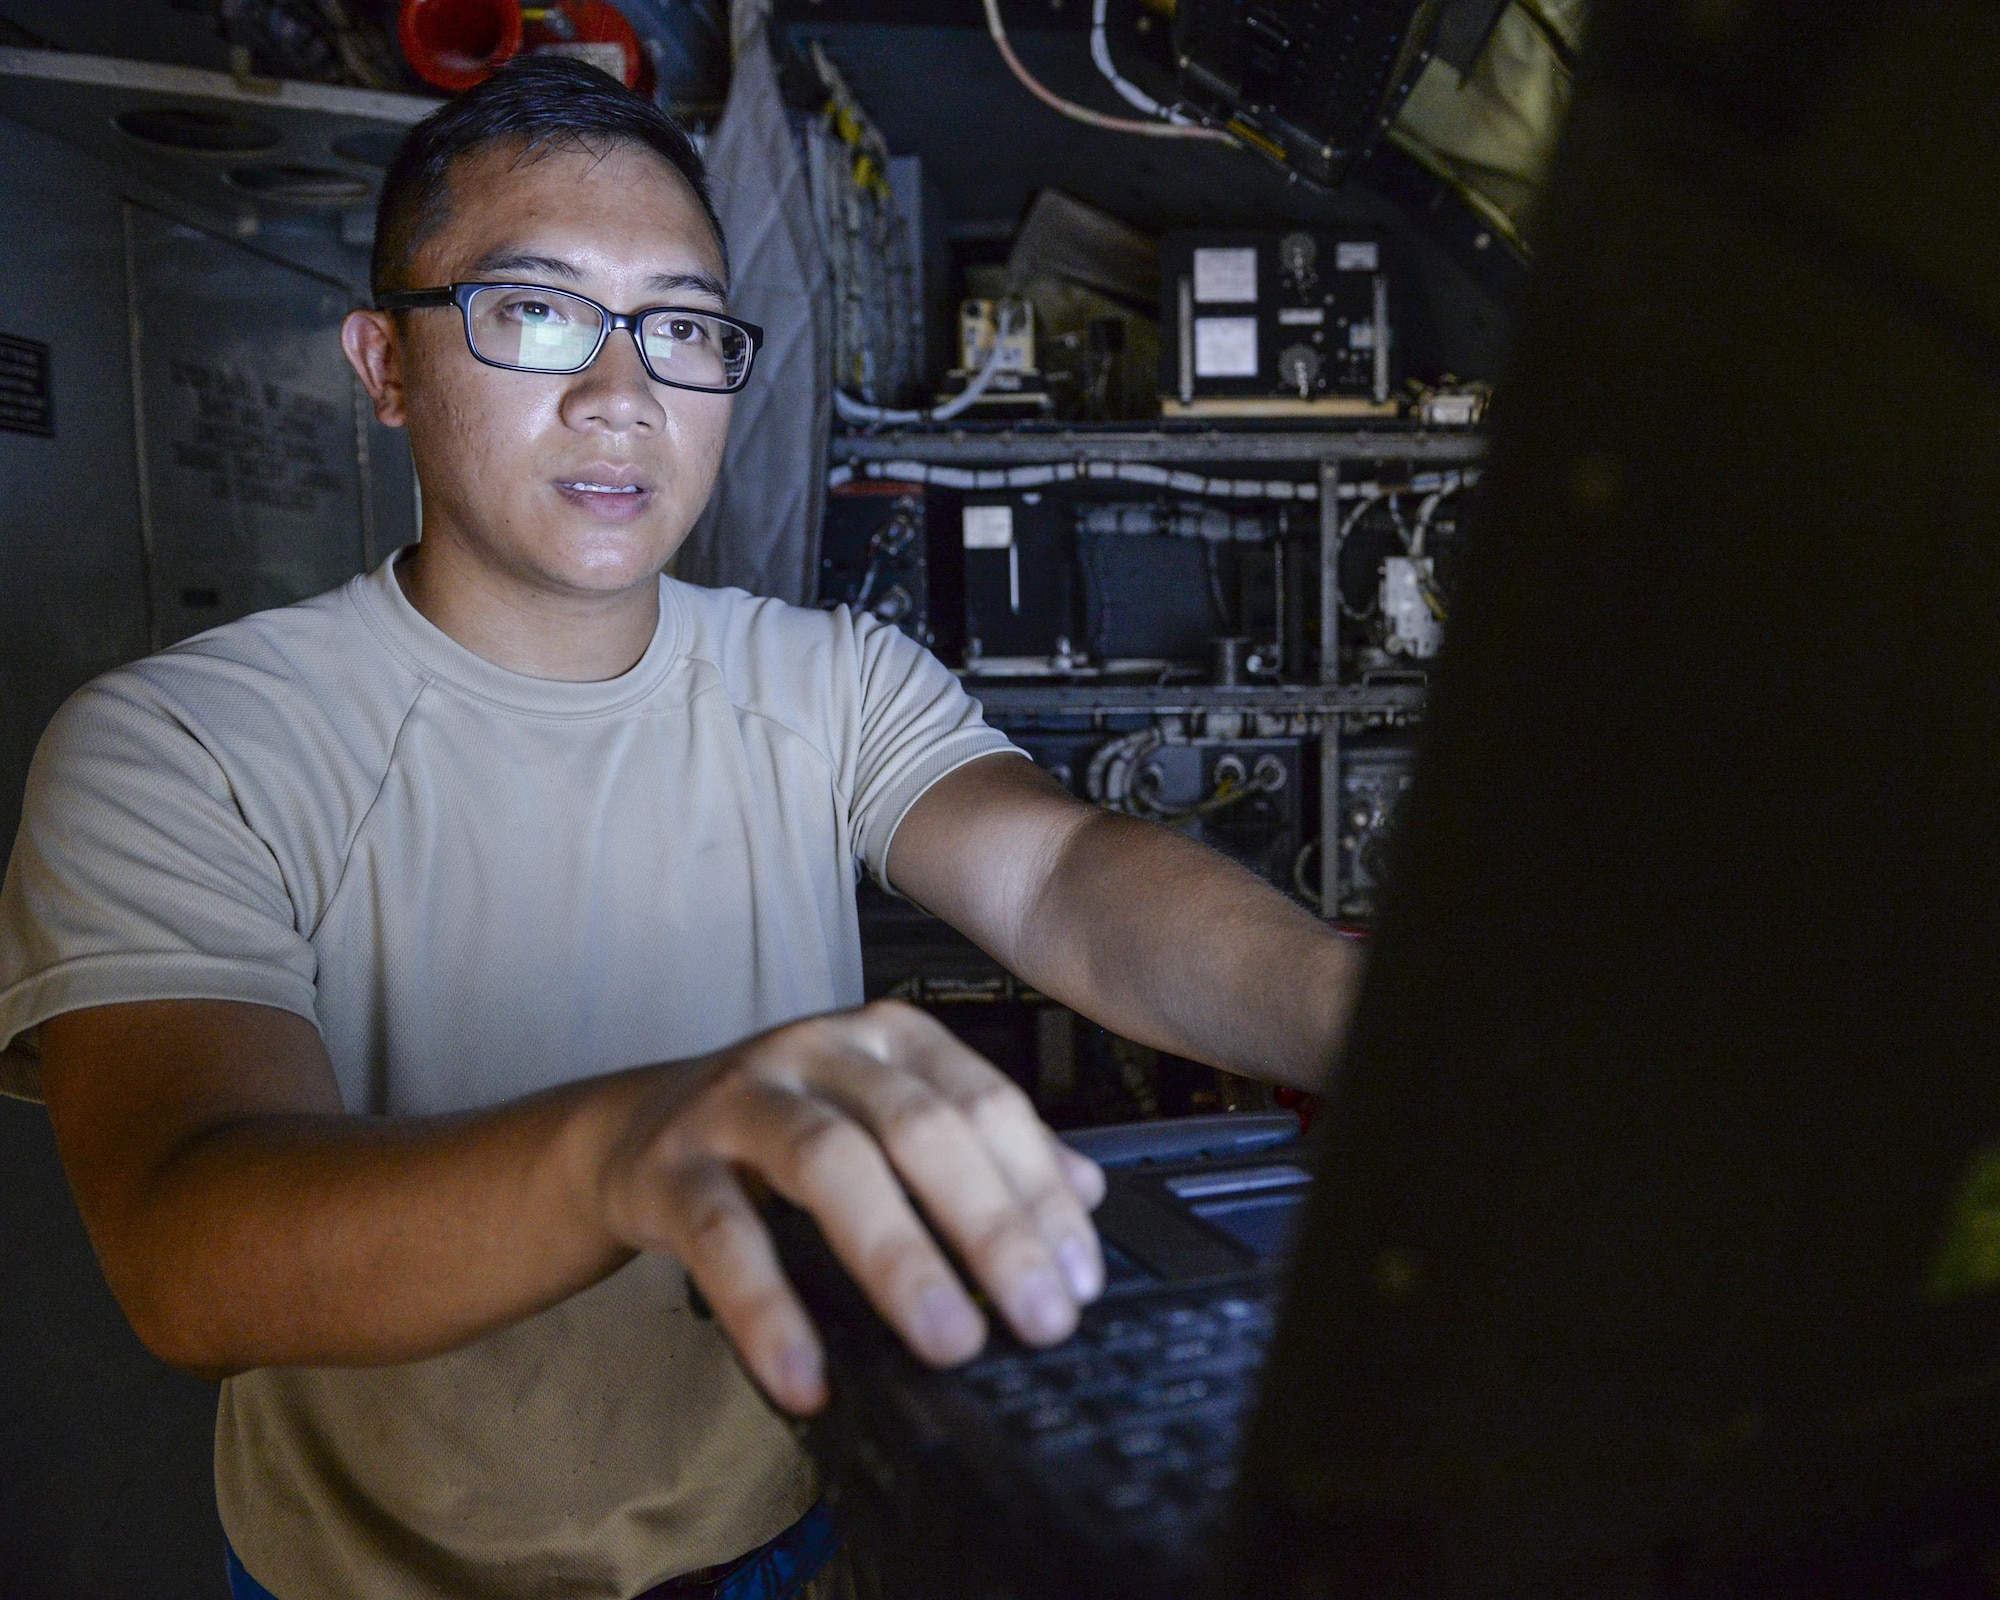 U.S. Air Force Senior Airman Tony Nguyen, guidance and control journeyman assigned to the 340th Expeditionary Aircraft Maintenance Unit, reviews a technical order before replacing a power control relay on a KC-135 Stratotanker at Al Udeid, Air Base, Qatar, July 7, 2017. The members of the 340th and 22nd EAMUs face minute-by-minute challenges in the sweltering heat on the runway as they work to keep a fleet of KC-135 Stratotankers ready to fly. (U.S. Air National Guard photo by Tech. Sgt. Bradly A. Schneider/Released)